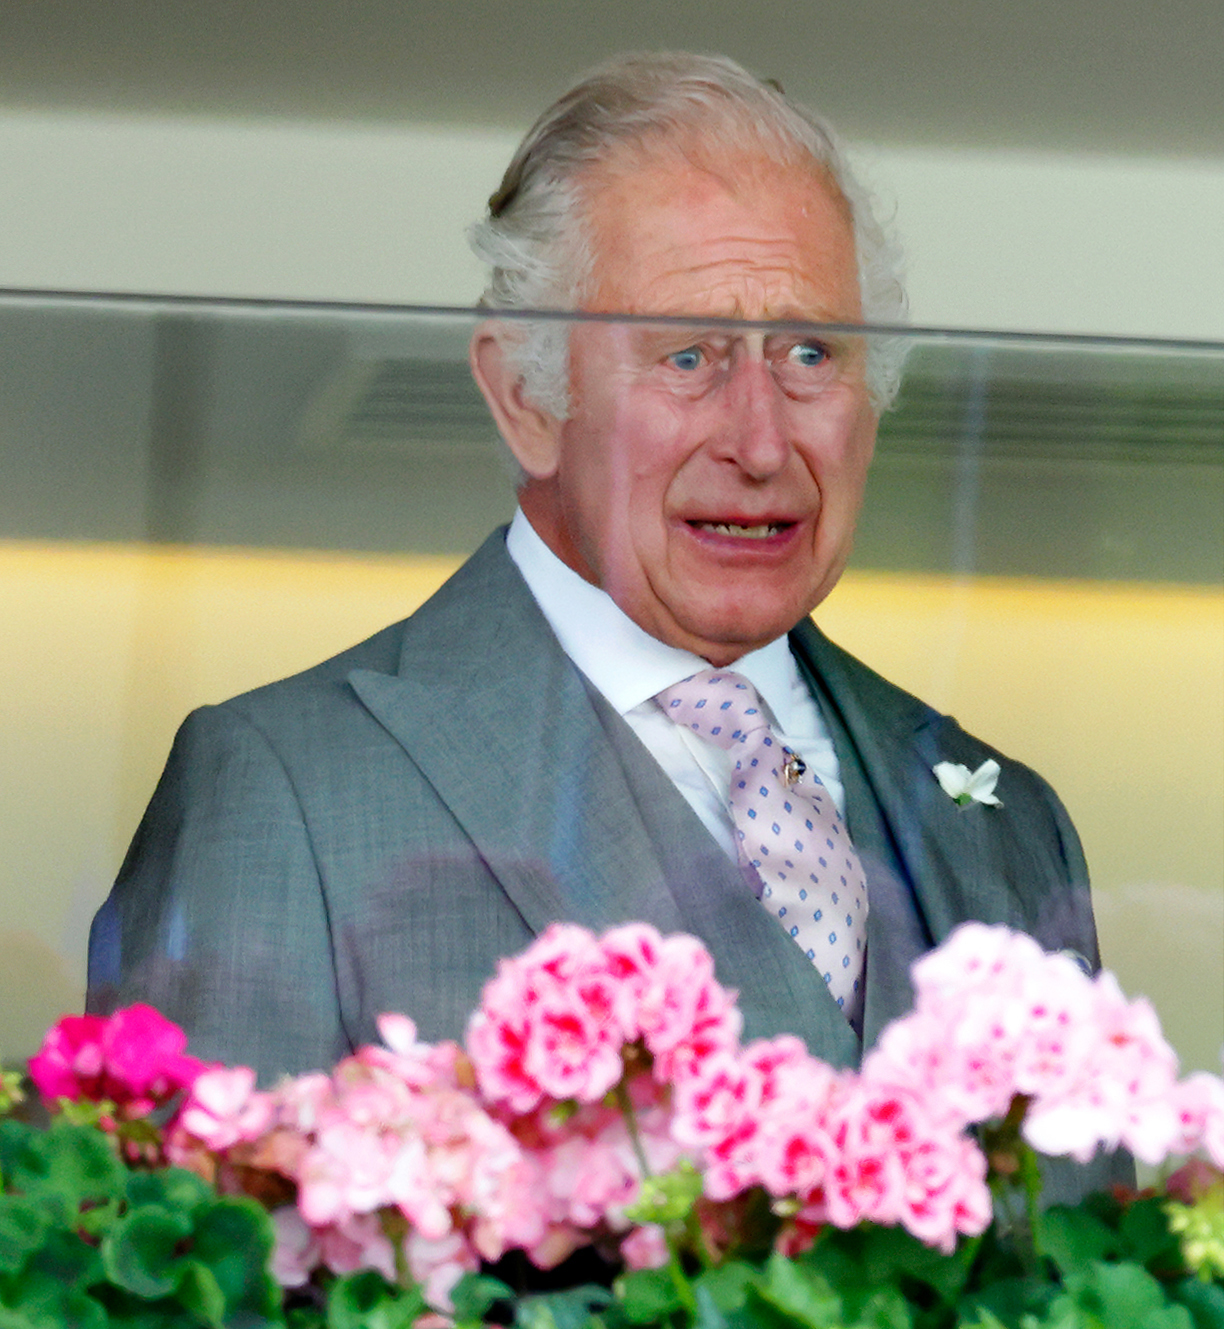 King Charles III at Ascot Racecourse on June 22, 2023 in Ascot, England. | Source: Getty Images